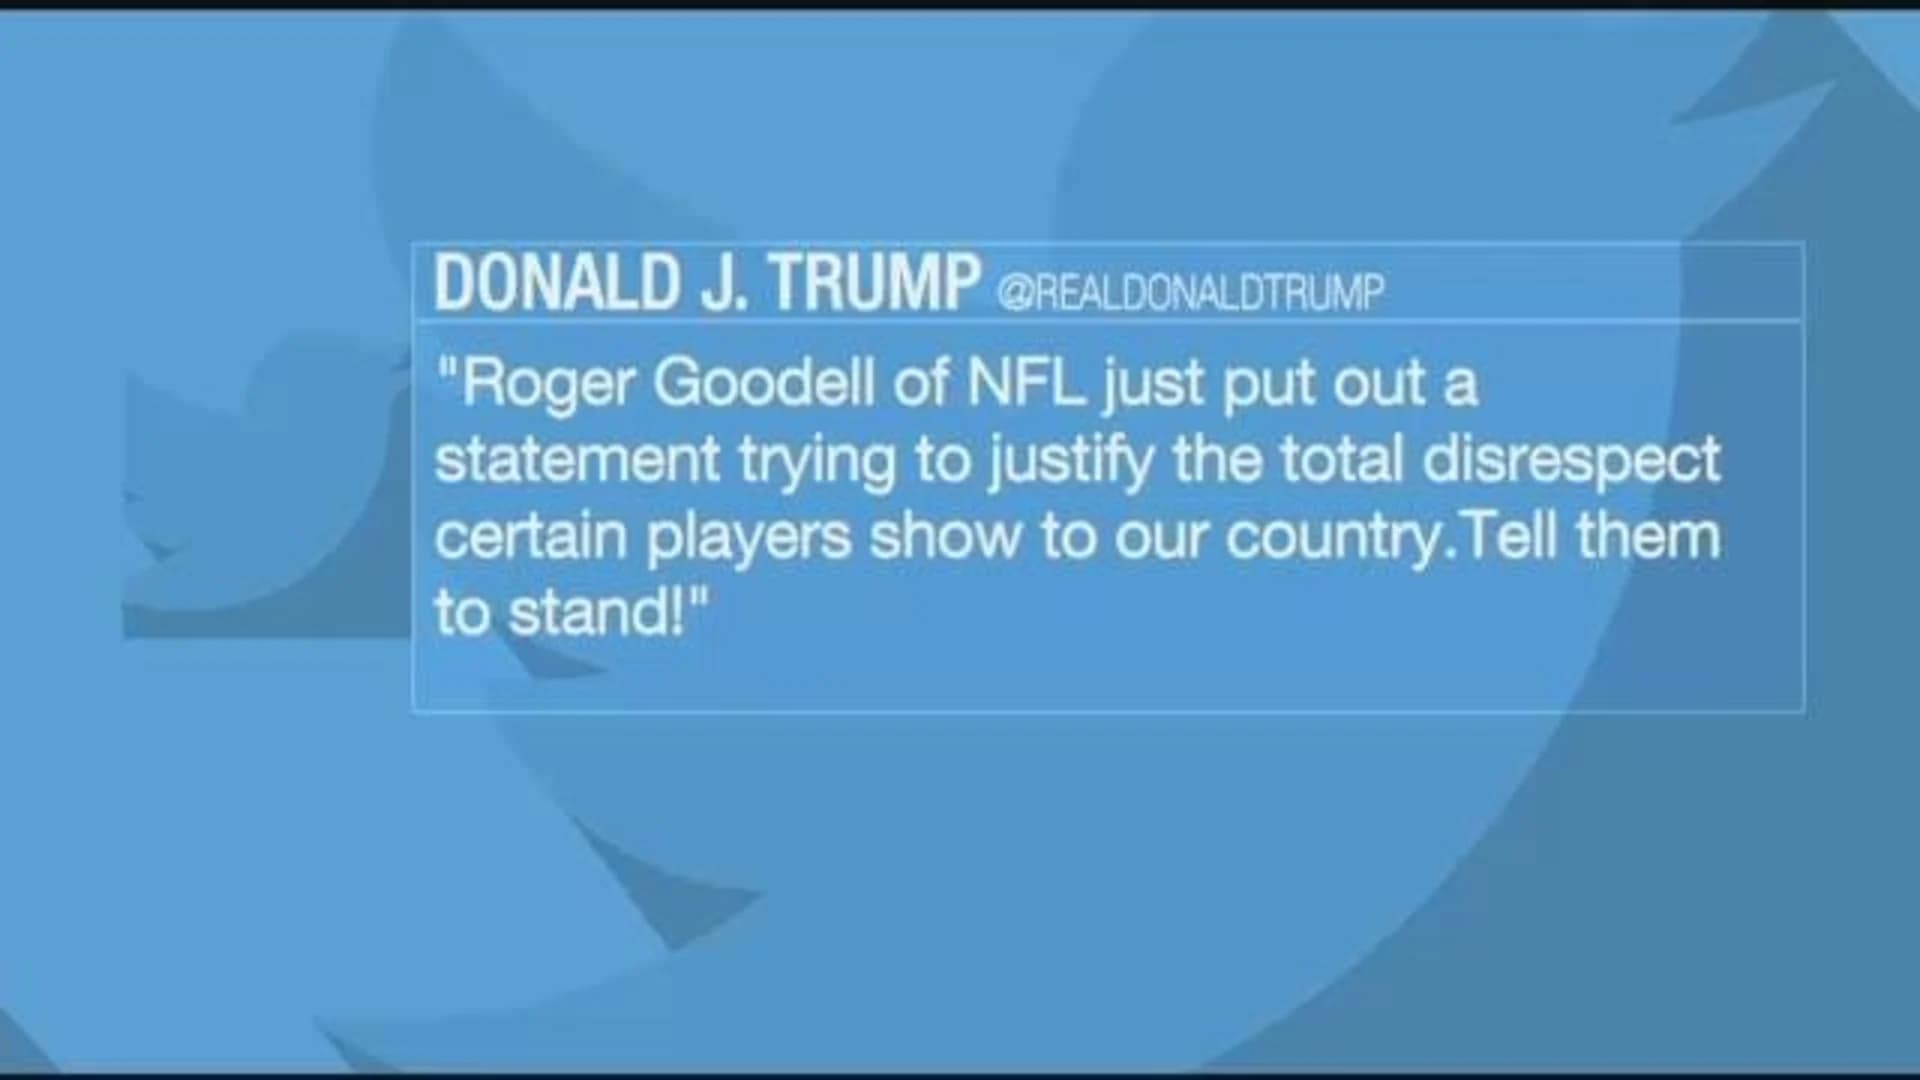 NFL owners speak out in support of players, against Trump